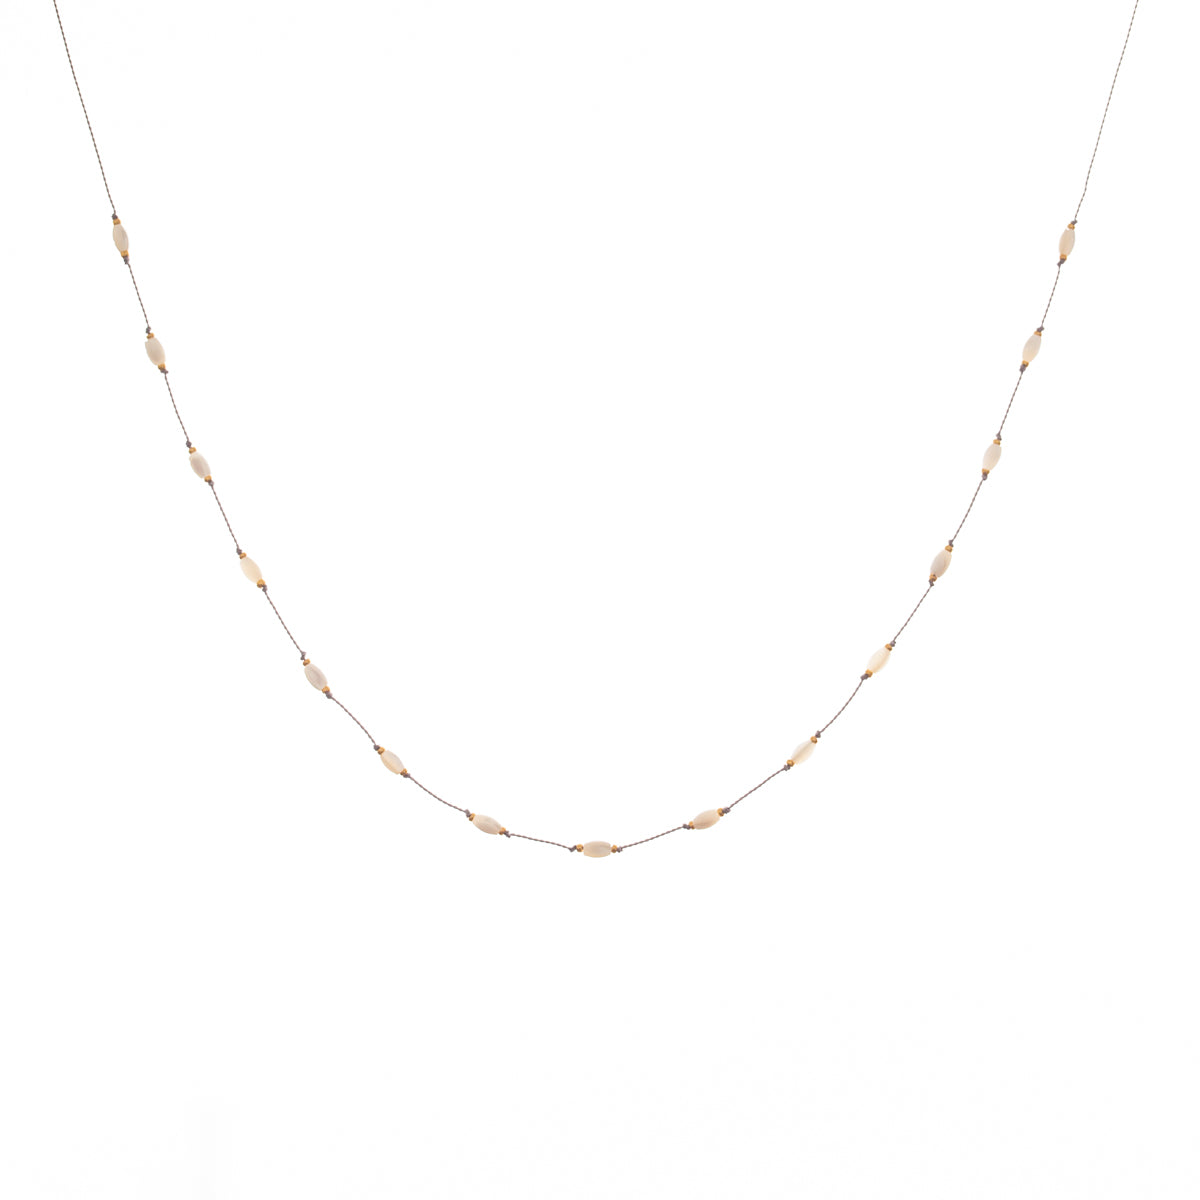 Our Tidepool necklace is durable, stylish and functional, a Bronwen Jewelry favorite for everyday active-chic